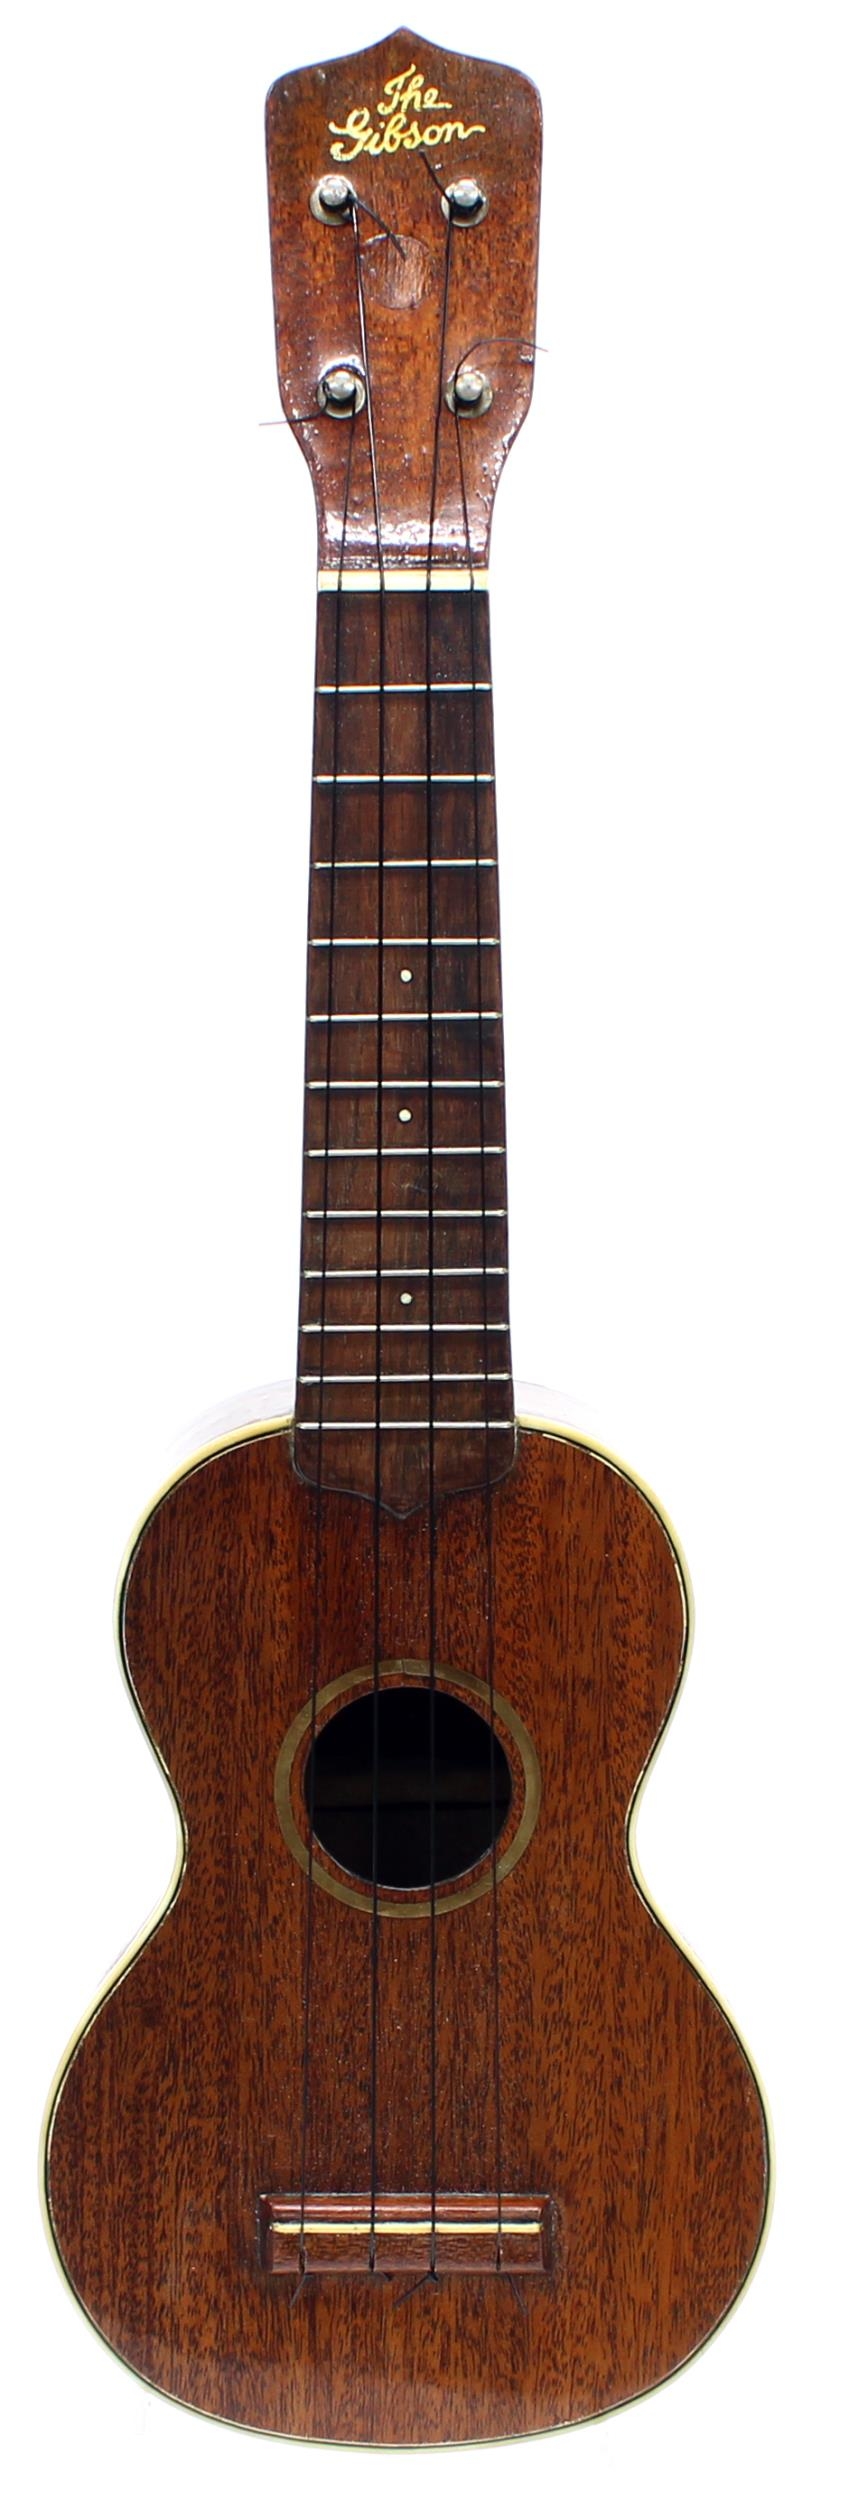 Rare late 1920s Gibson Uke-1 ukulele inscribed 'The Gibson' to the head, with ivory banded table and